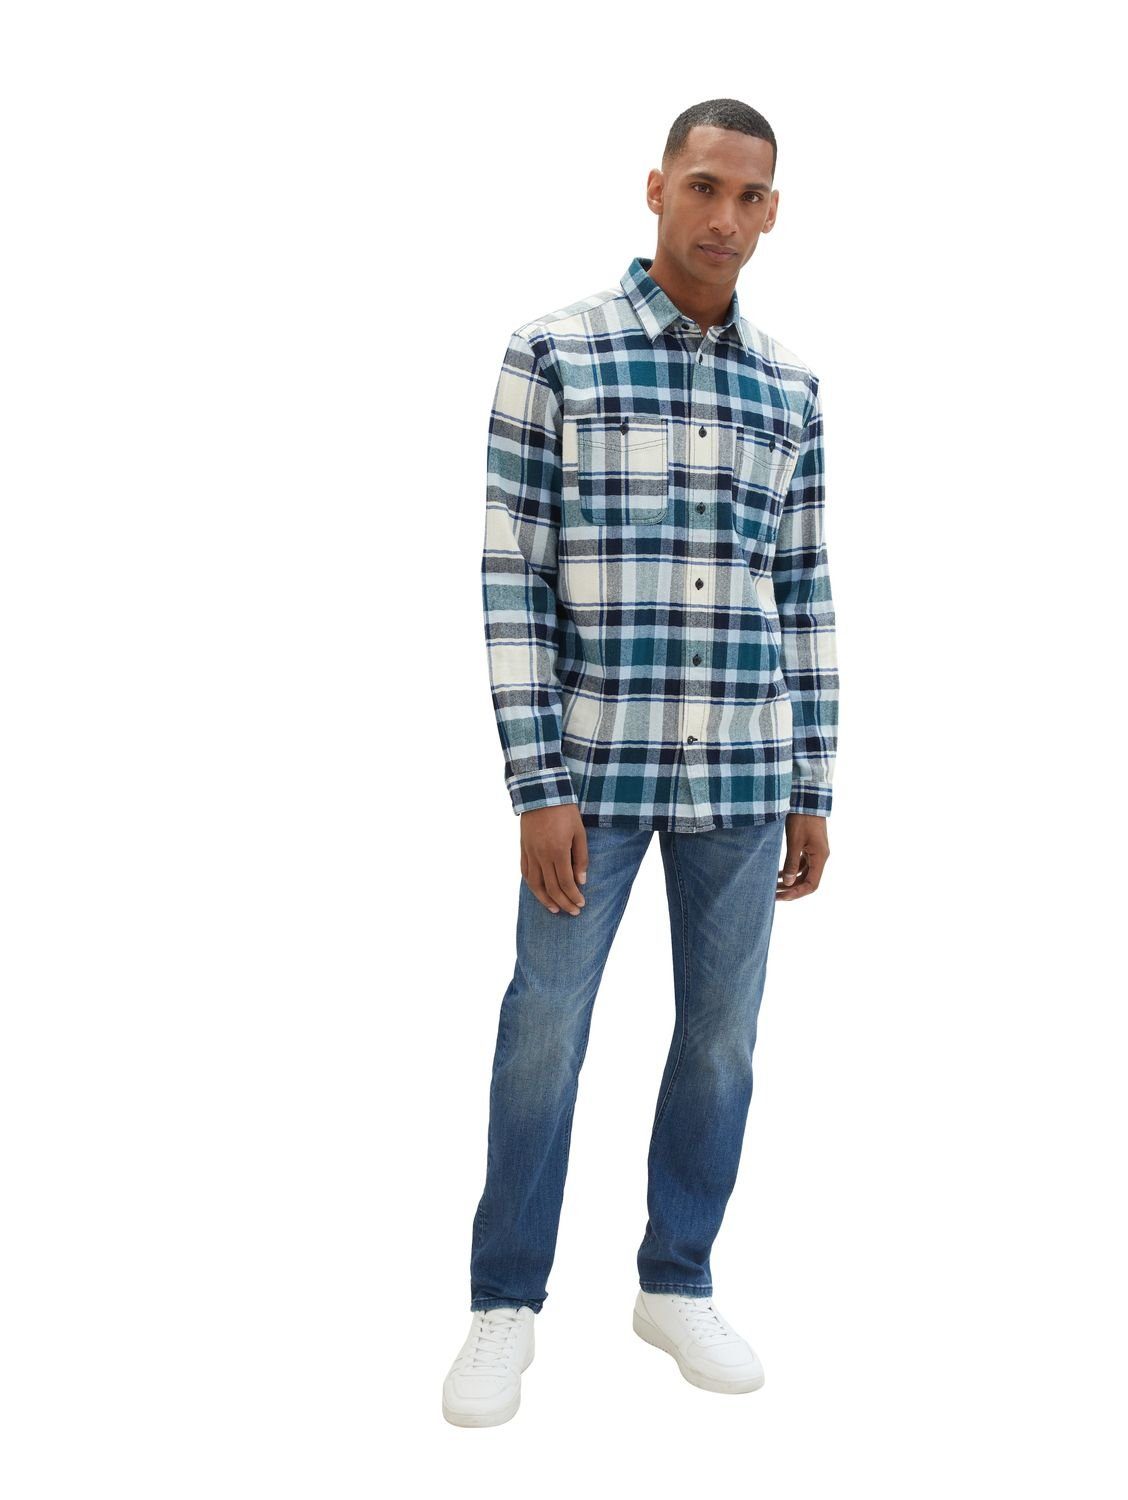 Langarmhemd check Blue TOM COMFORT Middle 33850 TAILOR (1-tlg) multicolor CHECK